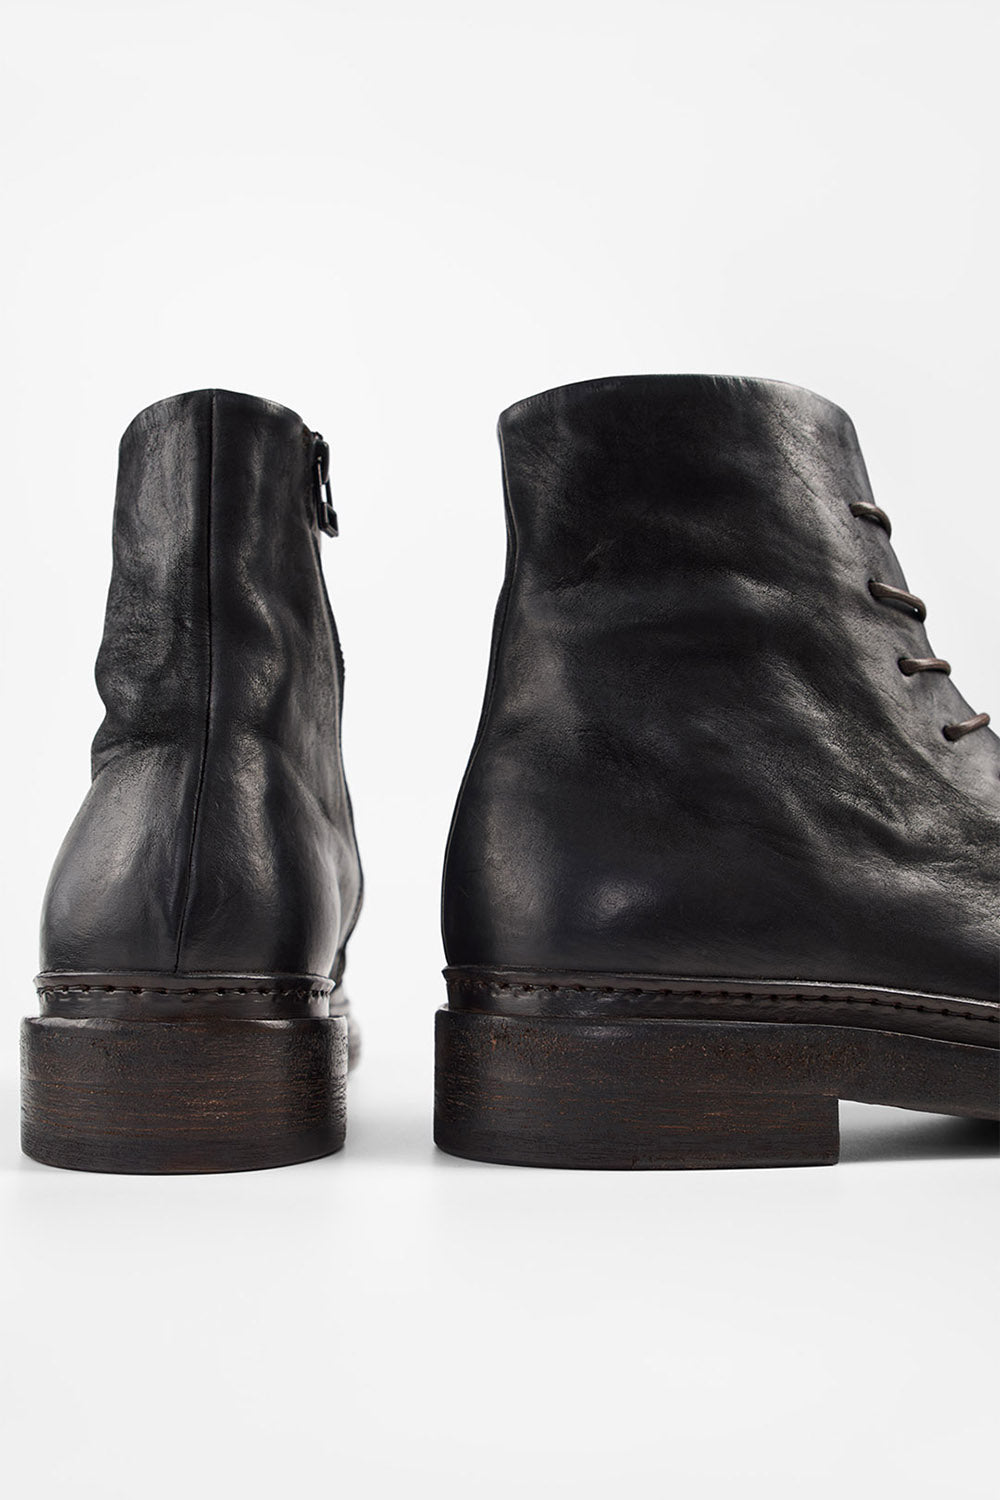 YALE matte-black welted oxford lace-up boots. – UNTAMED STREET